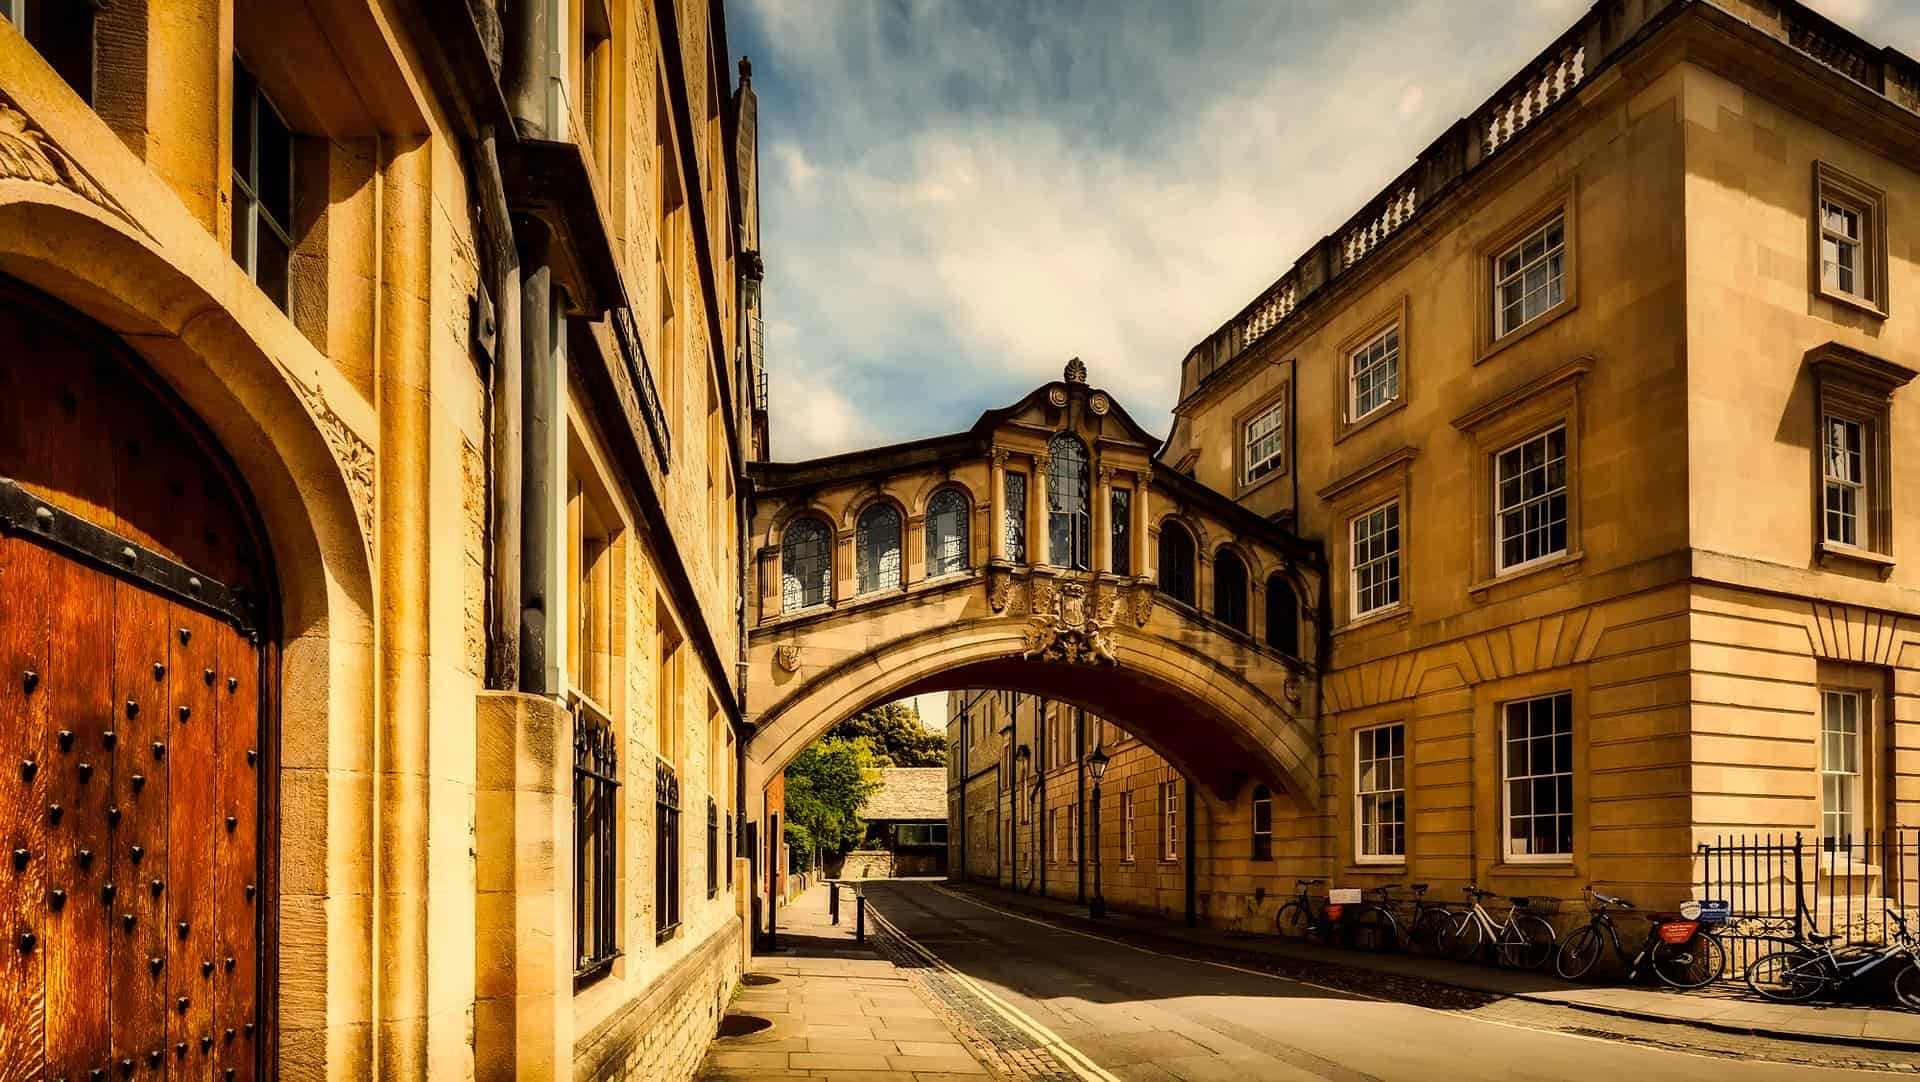 The Bridge of Sighs in oxford 